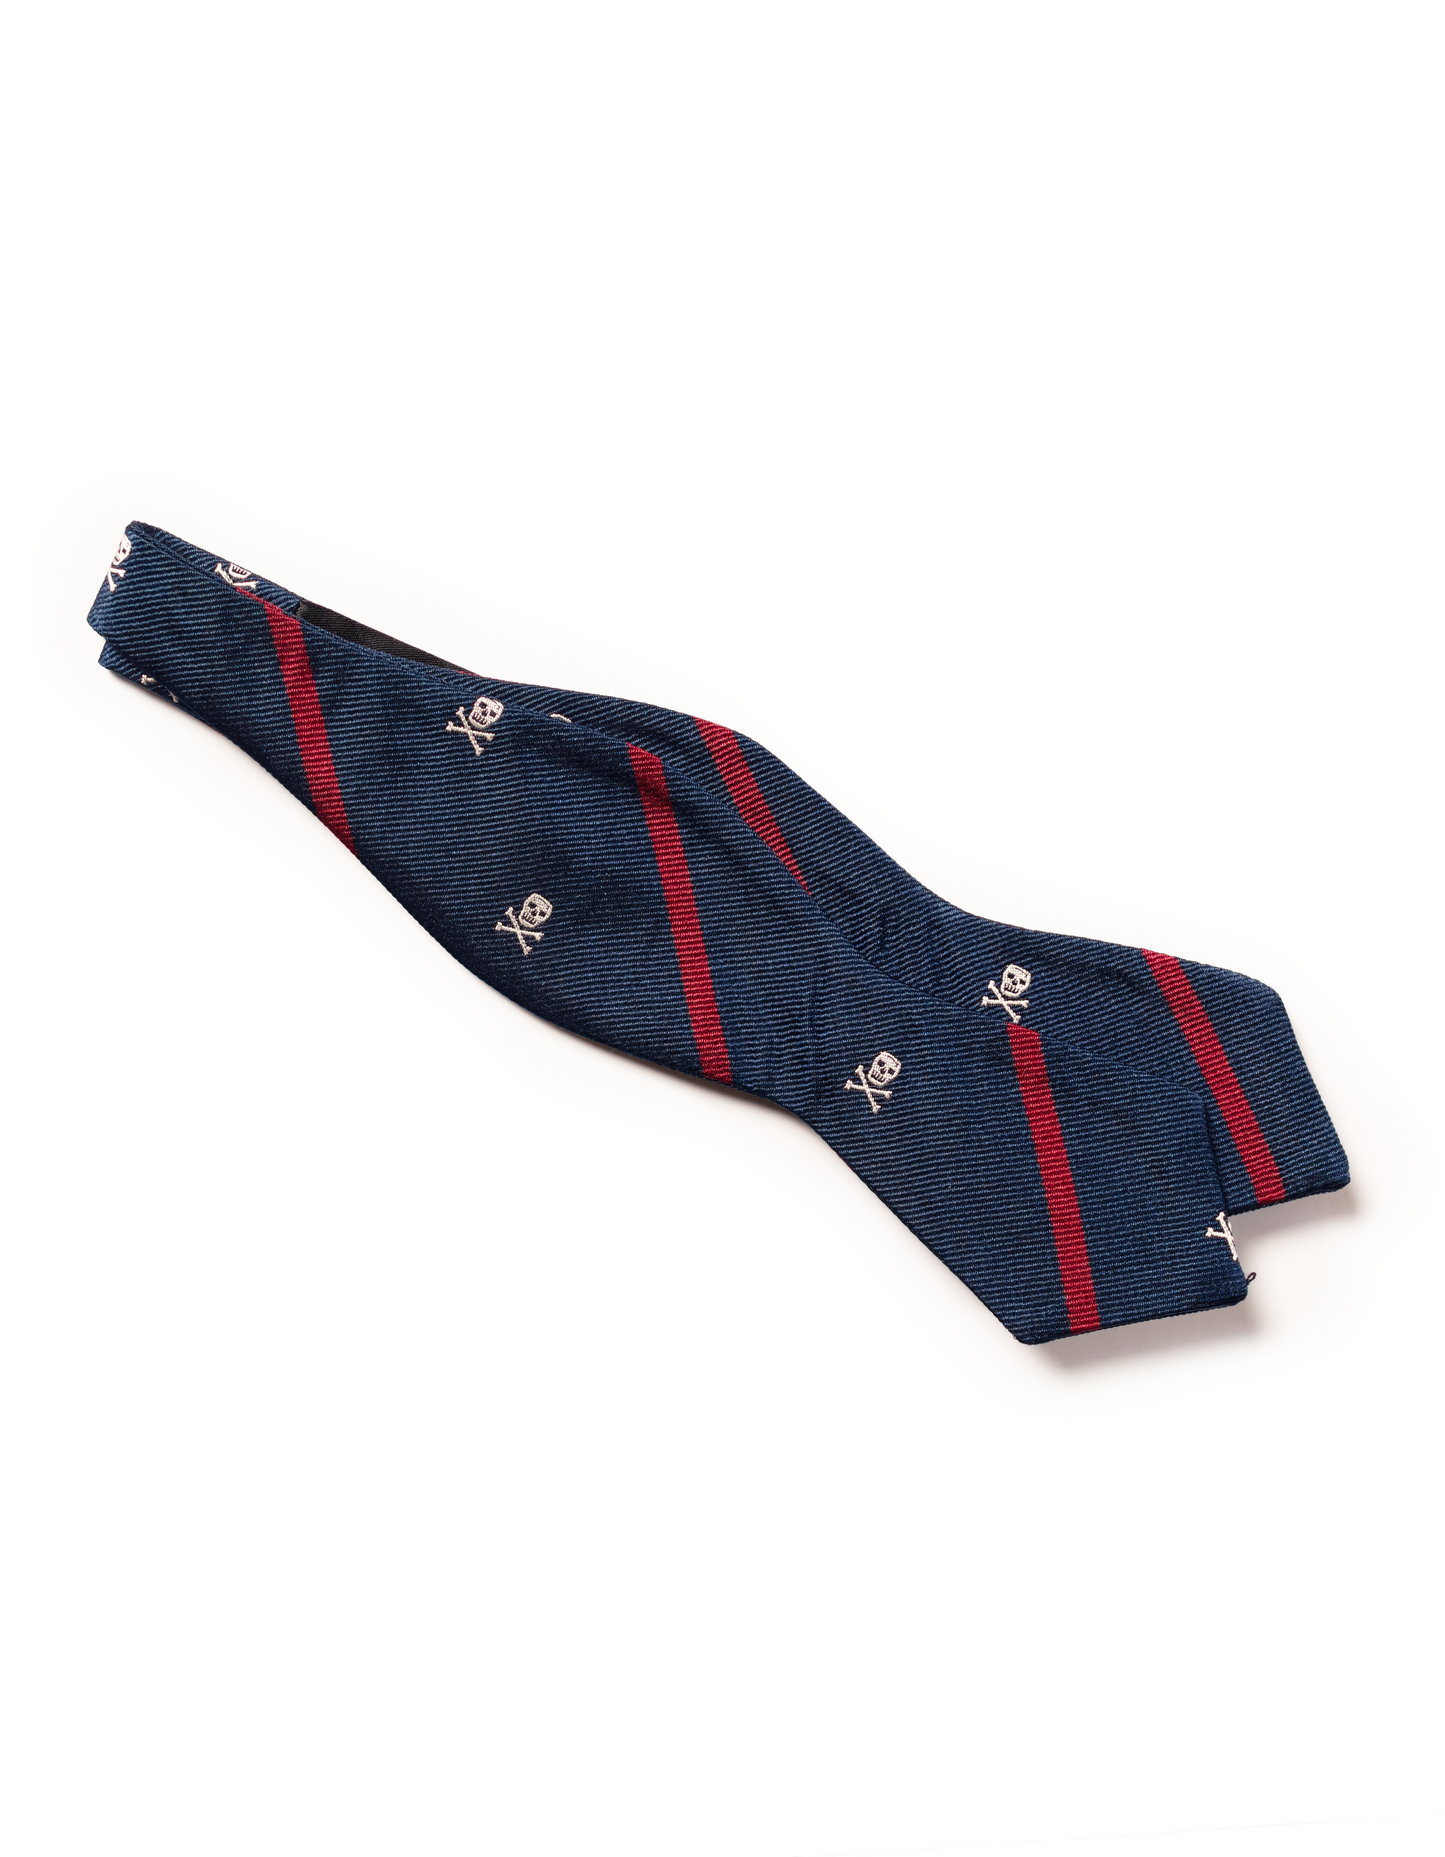 EMBLEMATIC SKULL AND CROSSBONES BATWING BOW TIE  - NAVY